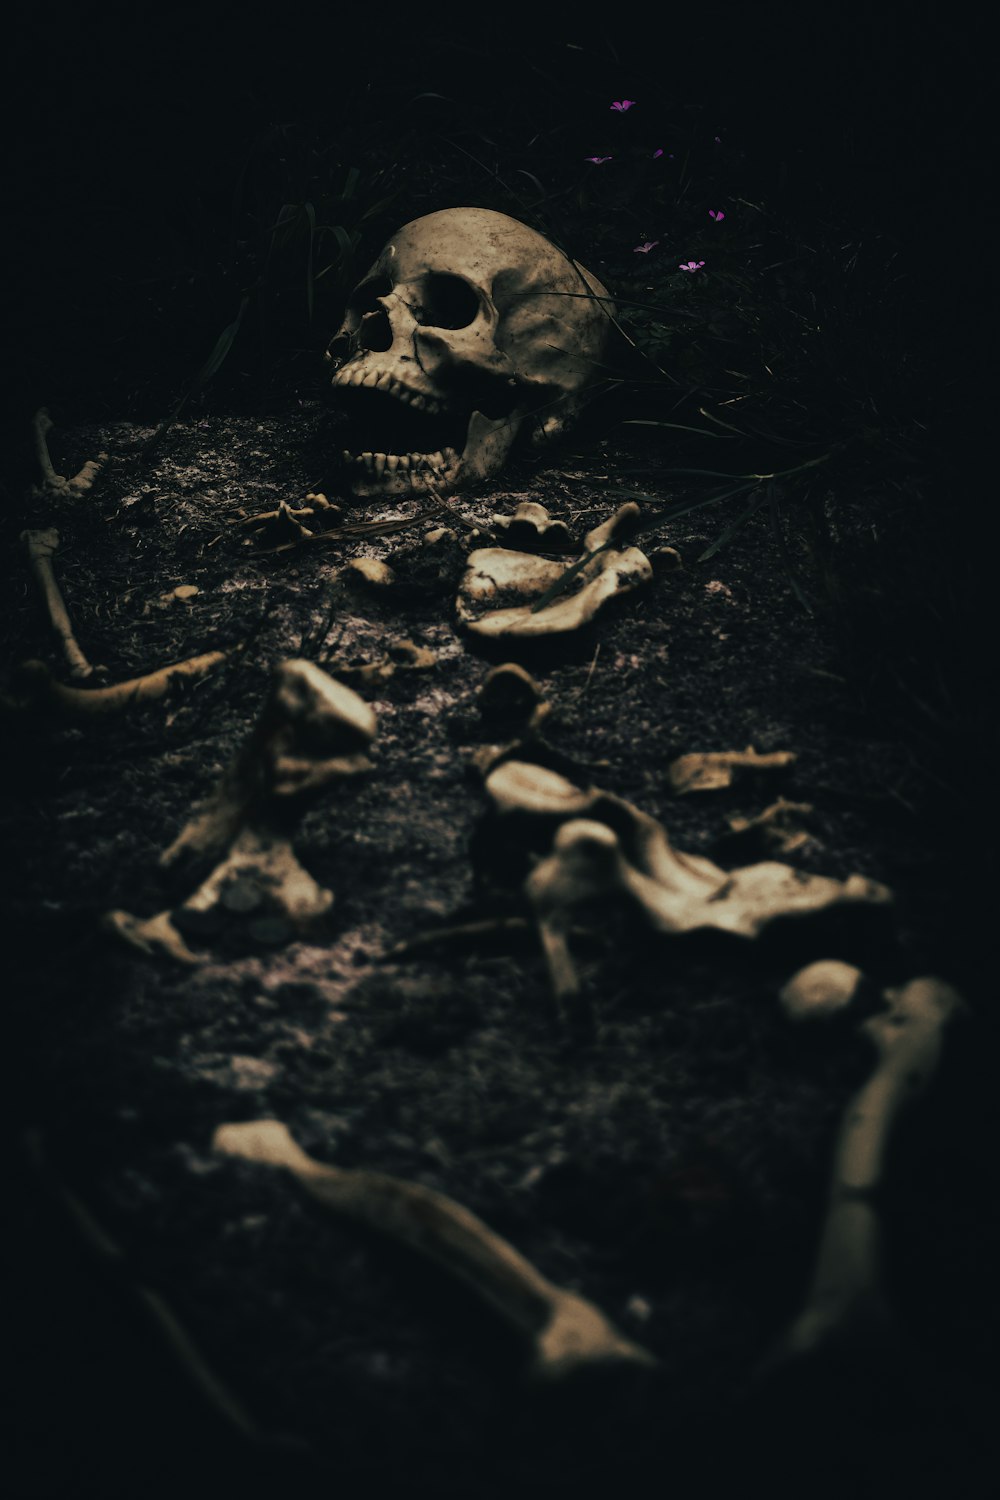 a human skull is shown in the dark